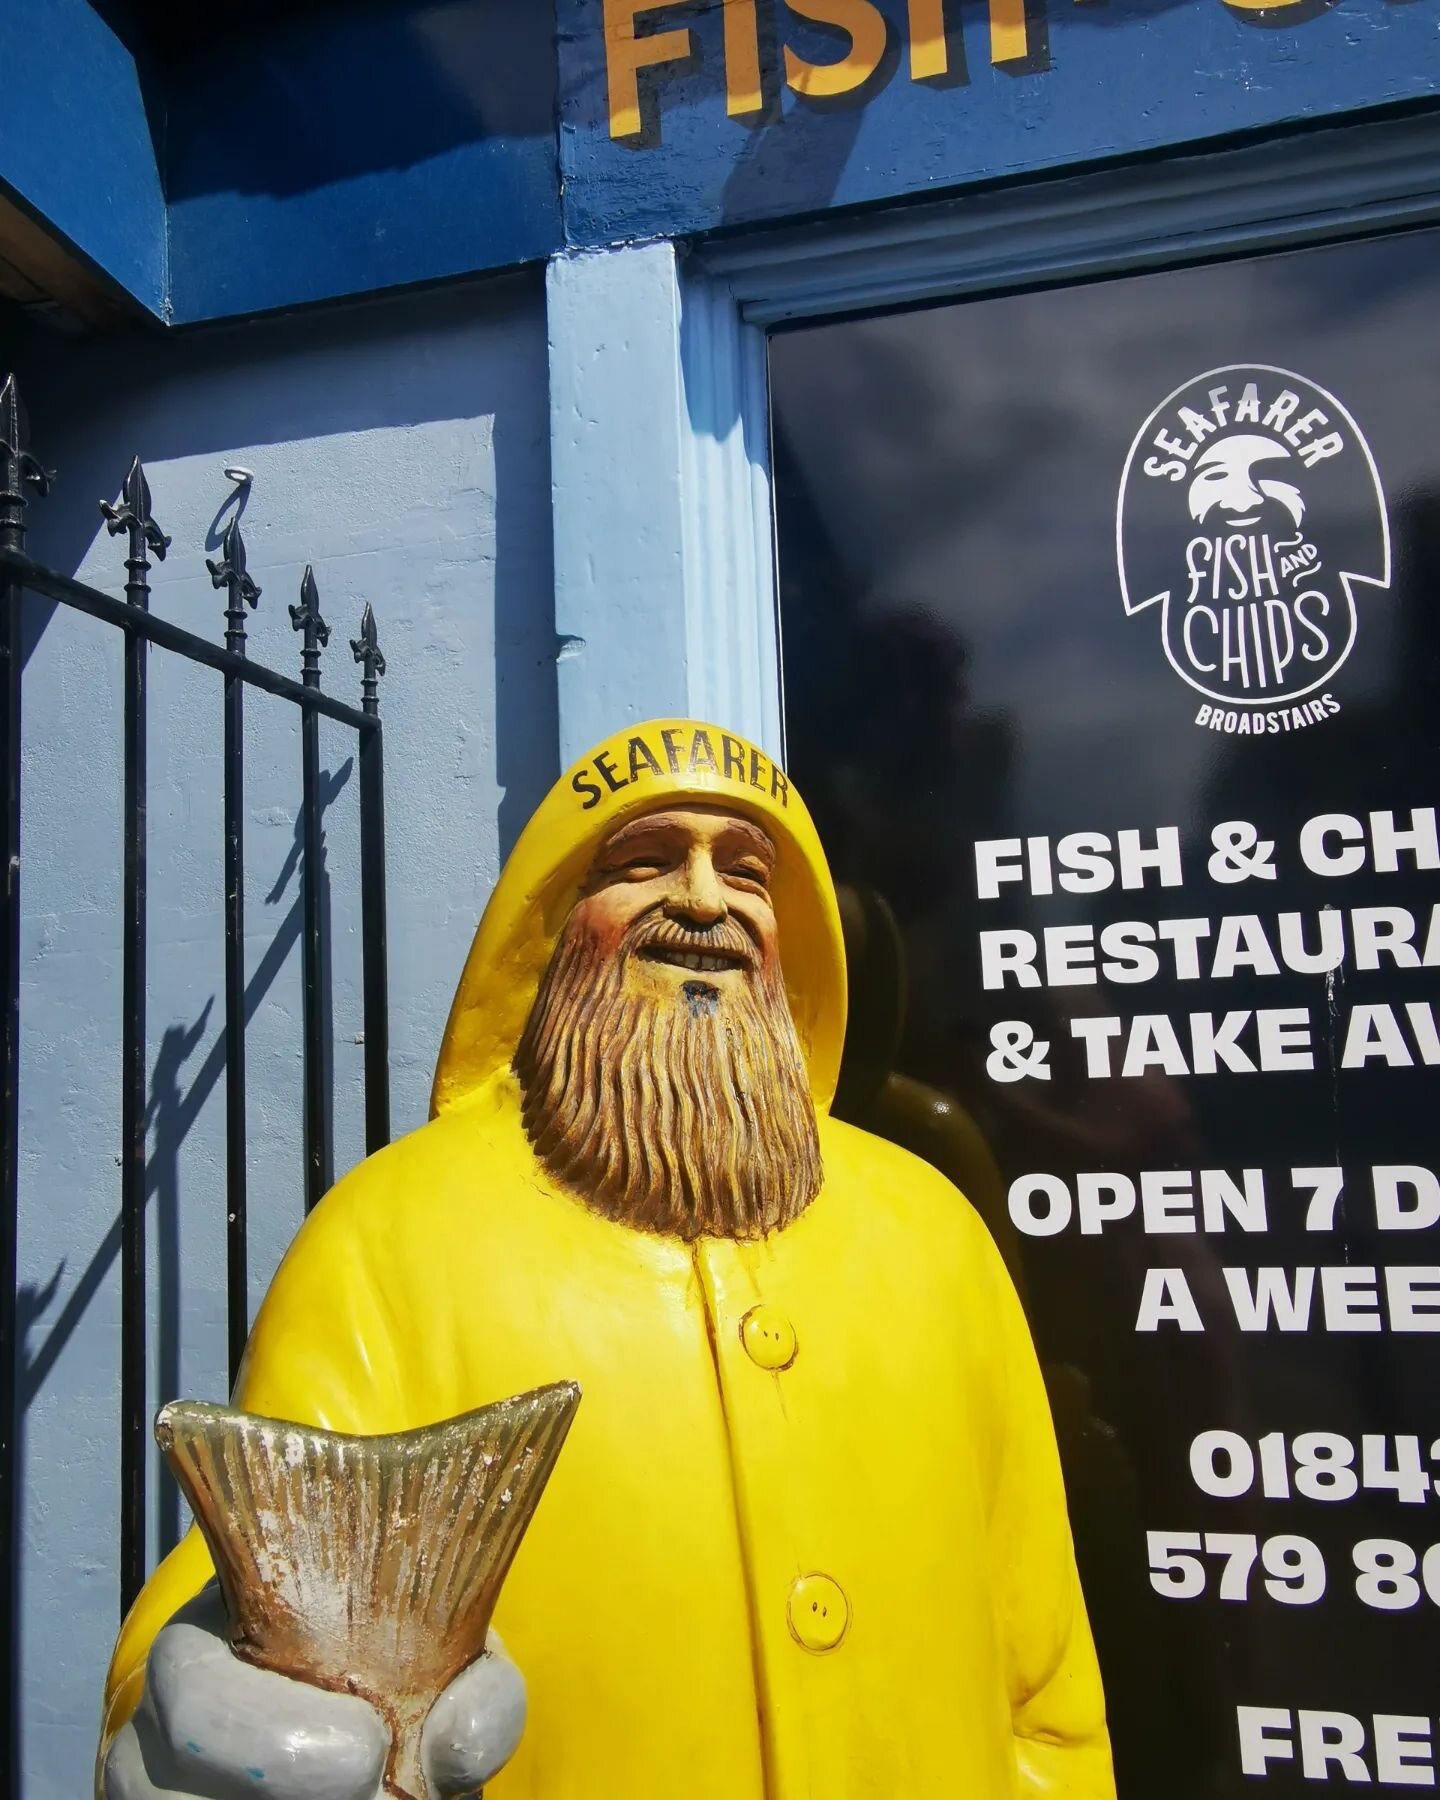 Let's talk fish &amp; chips...

We all know seaside towns wouldn't be complete without the British classic that is fish &amp; chips. So here are some honourable mentions for great chippies in Ramsgate and Broadstairs...

🐟 PETERS FISH &amp; CHIP FAC